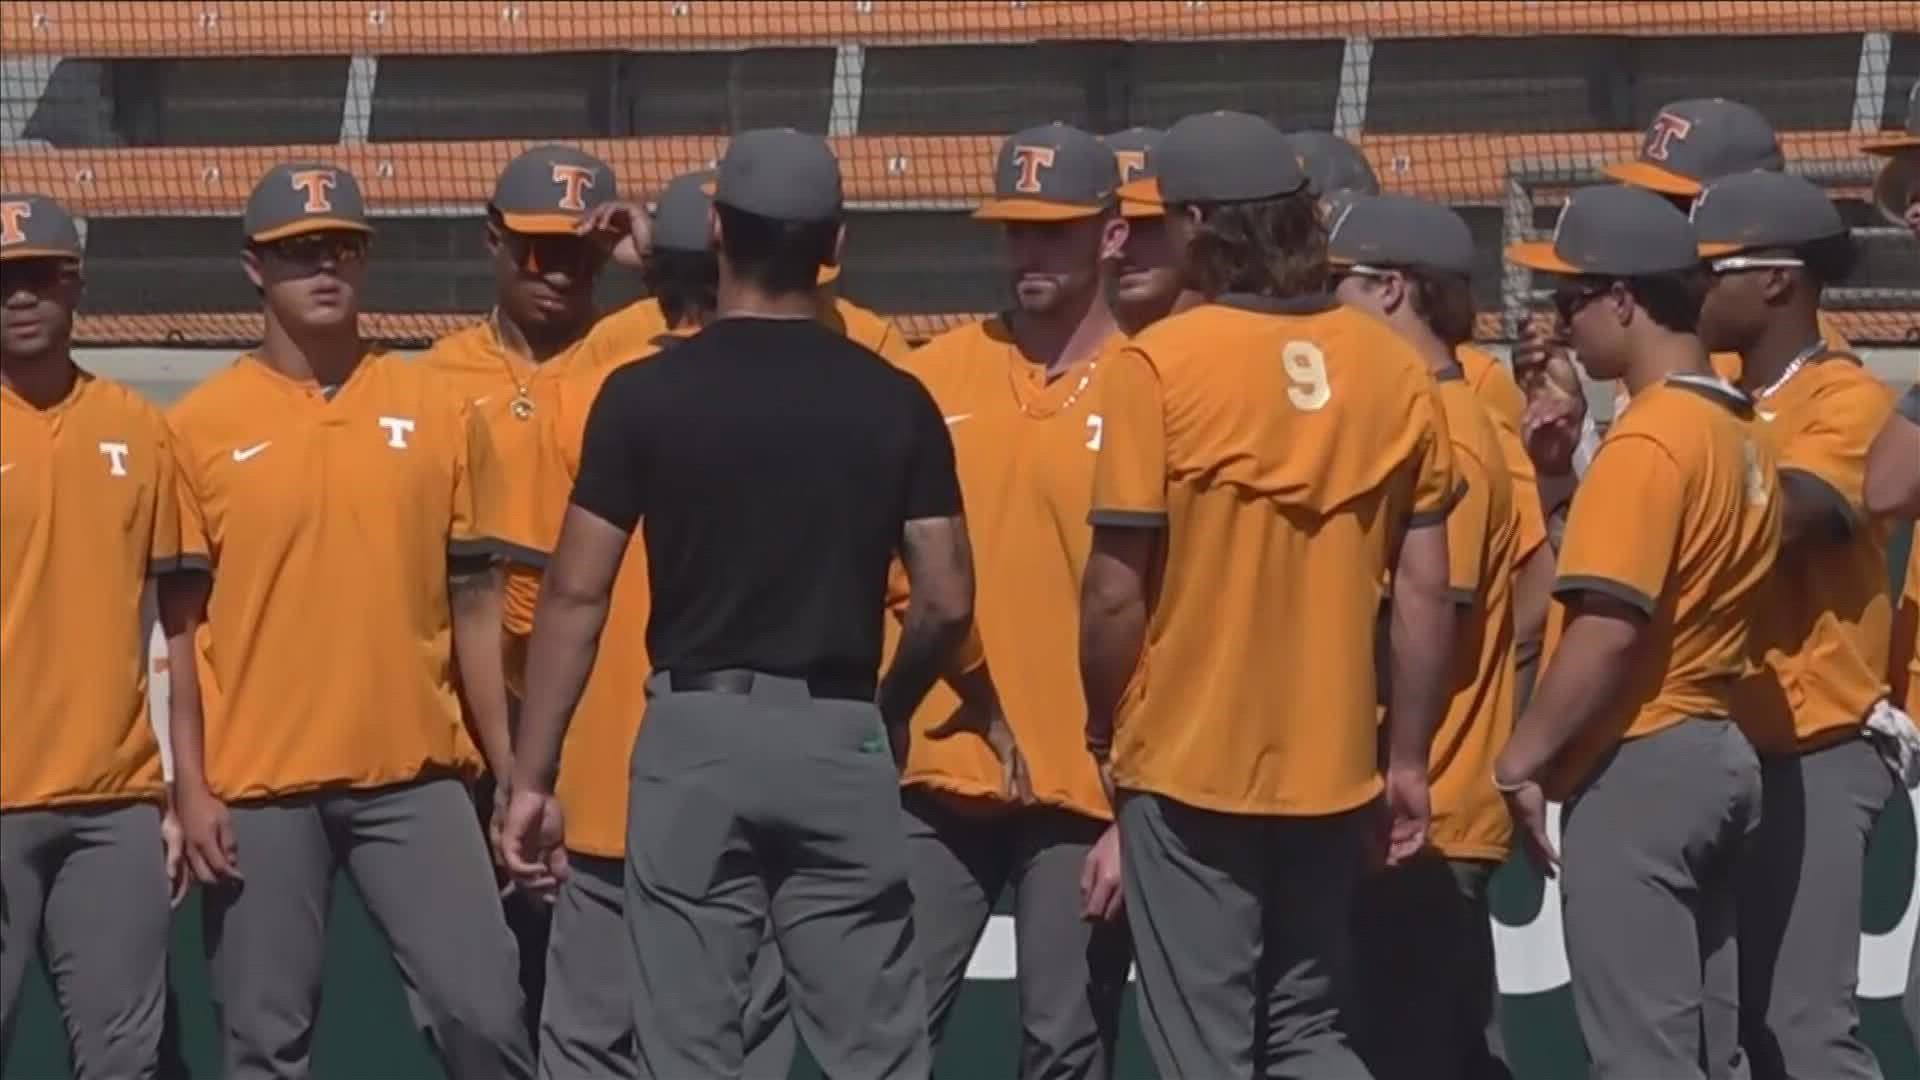 Ranked No. 1 in the country, the Tennessee Vols are fighting to make it back to the college baseball world series, hosting ASU in first match-up.